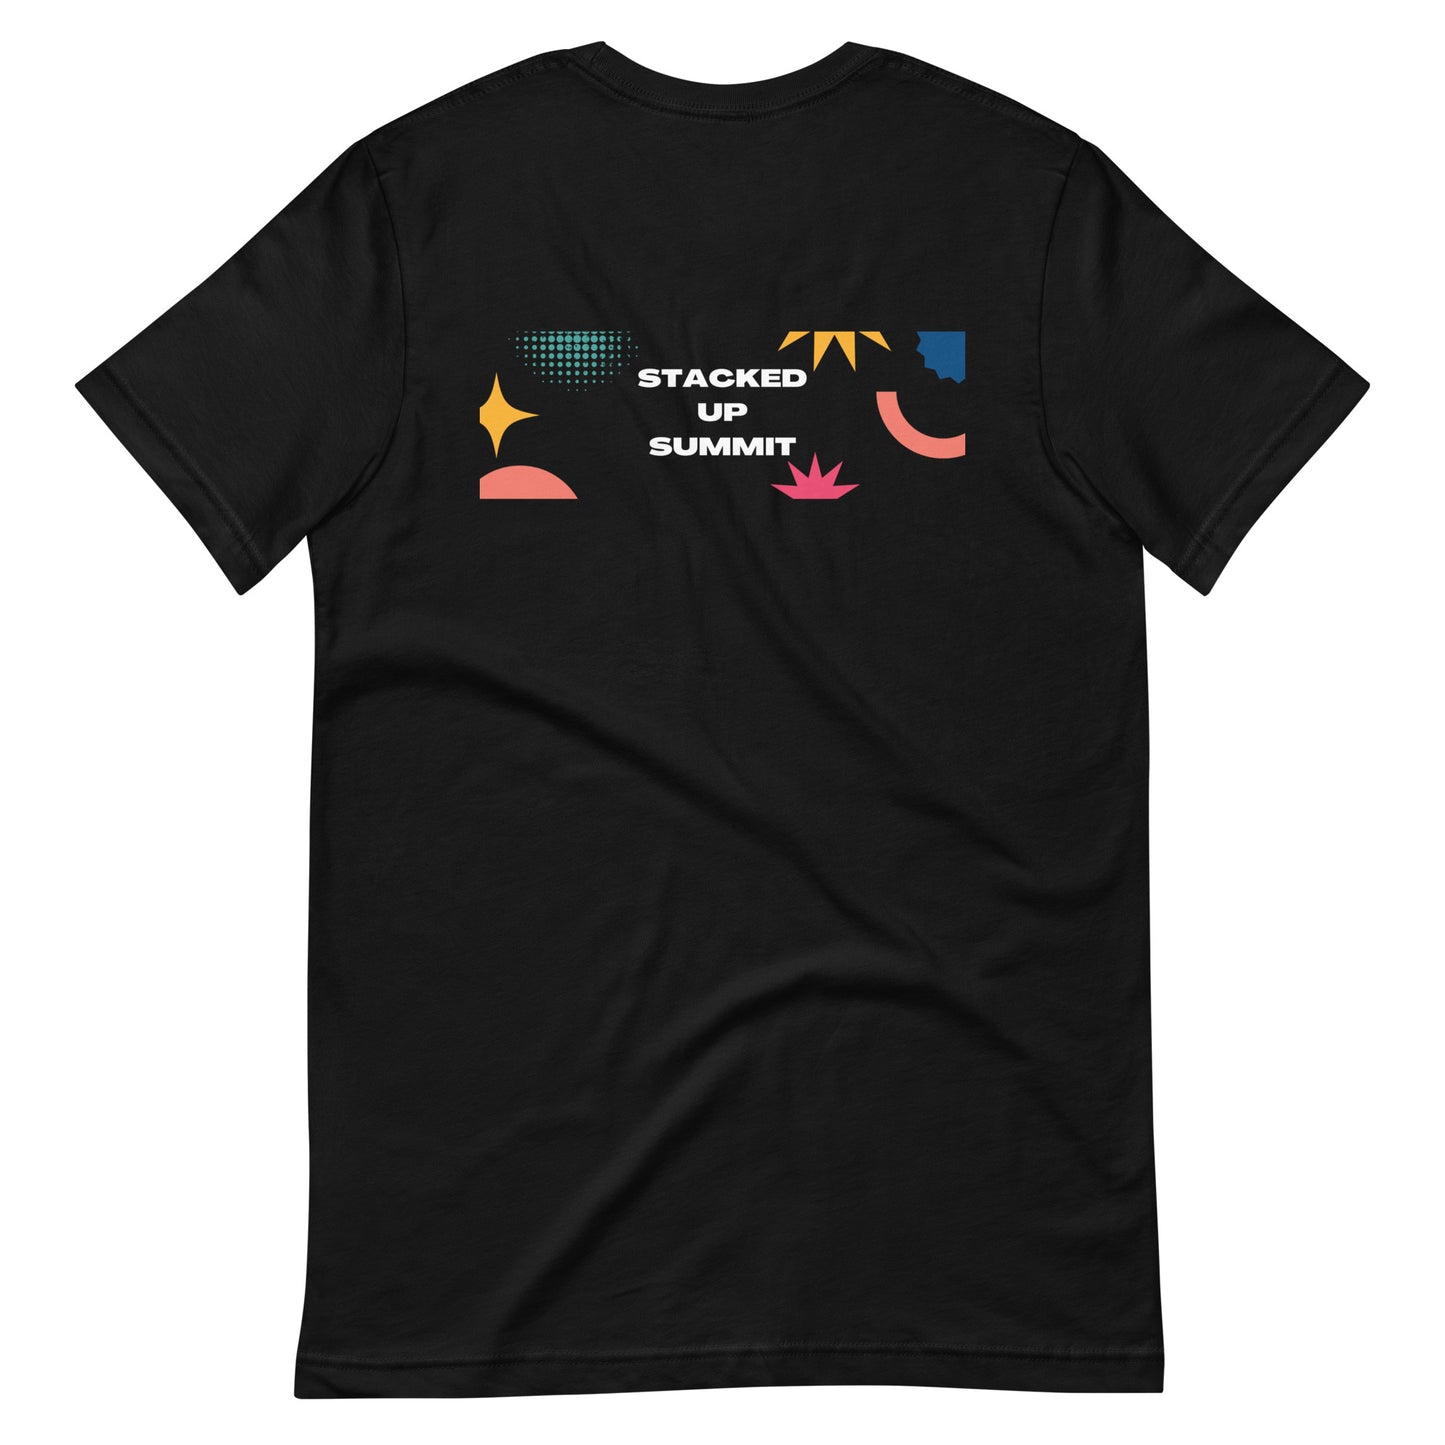 Stacked Up Summit T-shirt